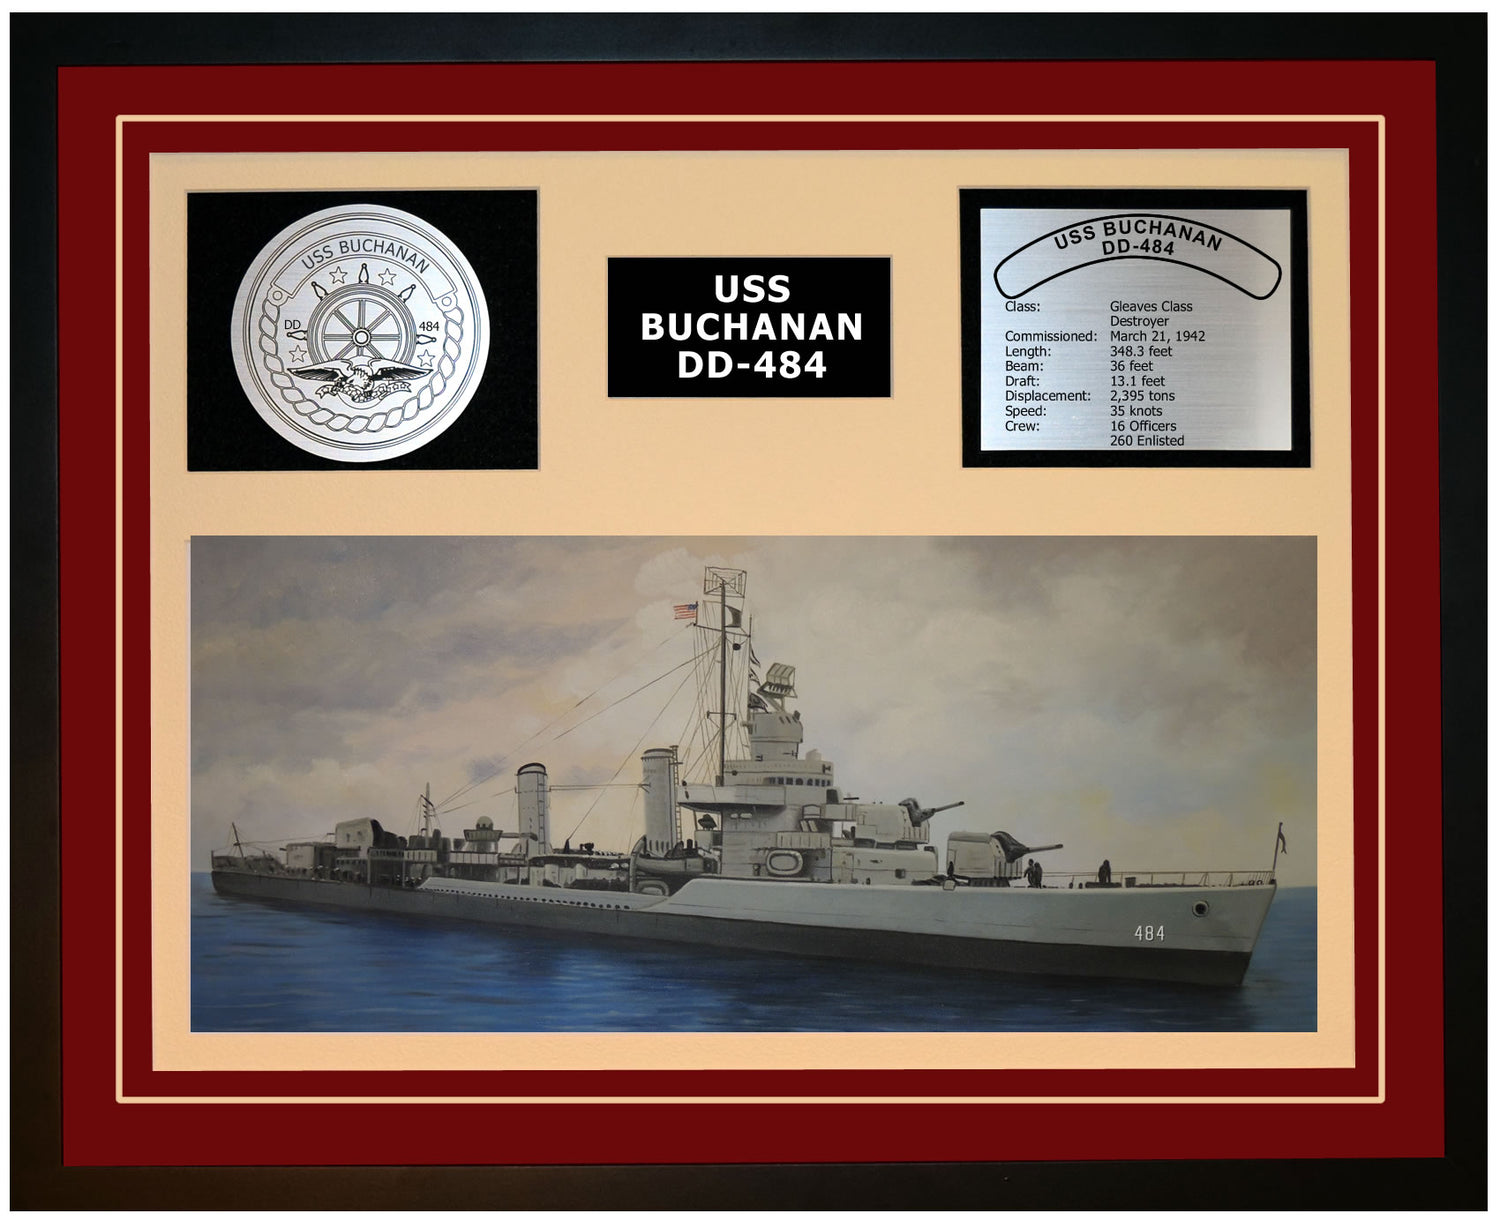 United States Navy Ships offering many plaques, artwork and photos